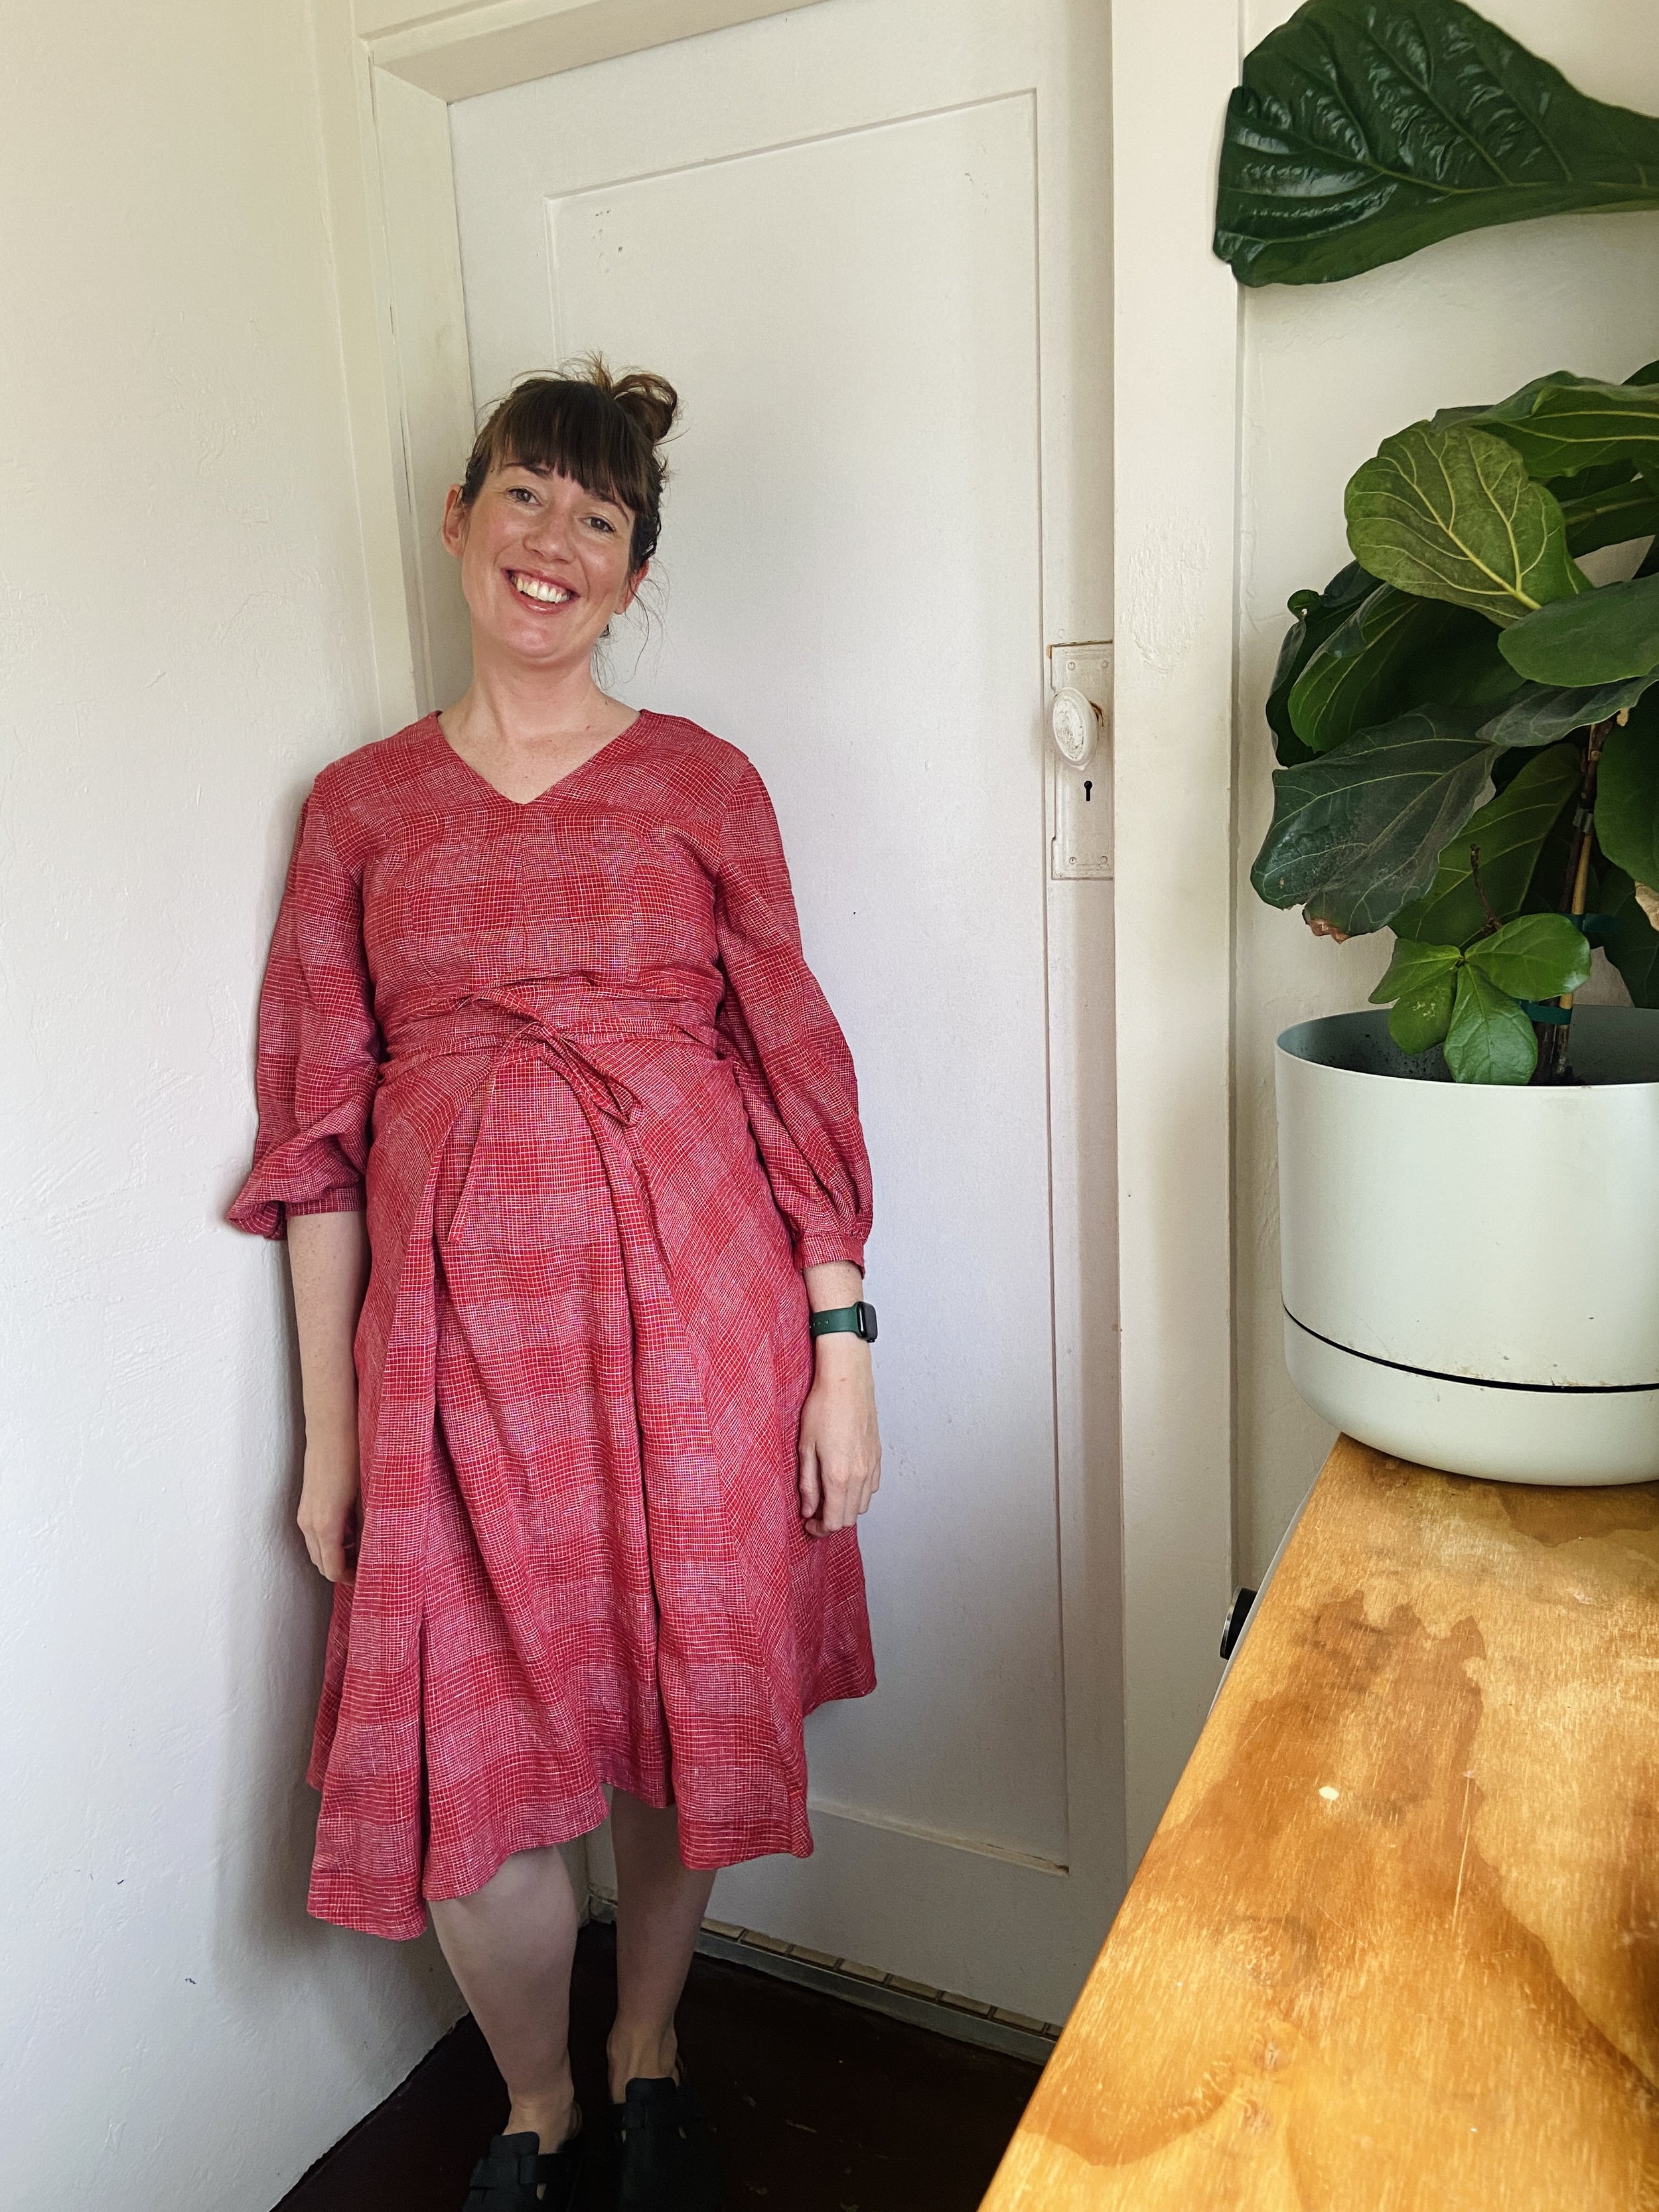 Emily's maternity wear suggestions — In the Folds